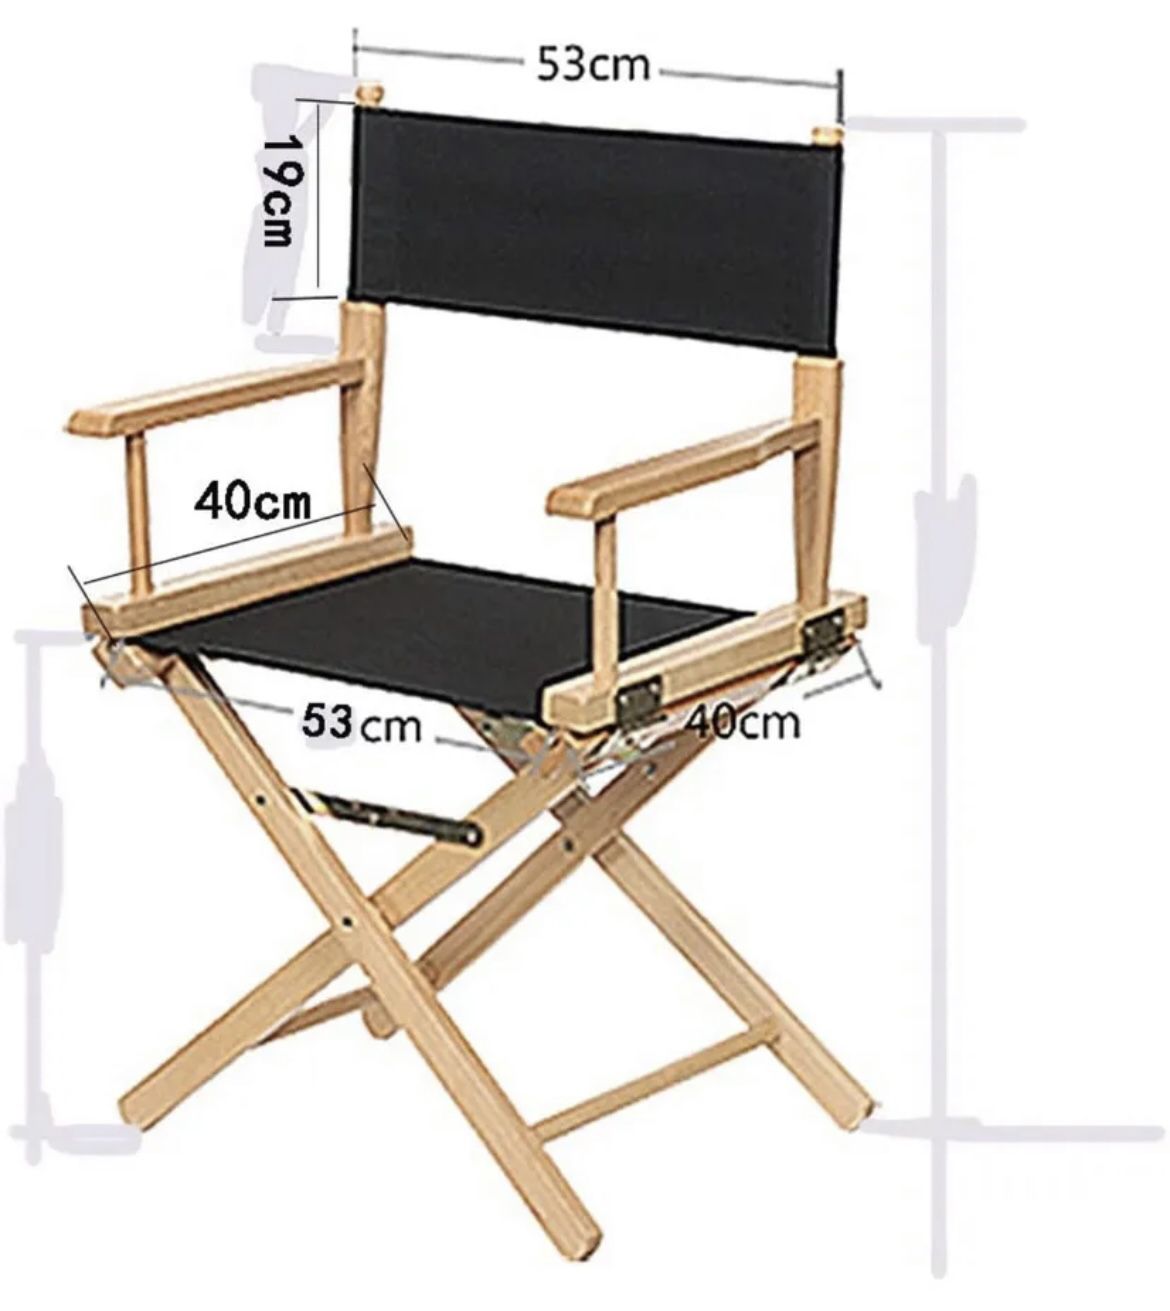 Upone Directors Chair Canvas Replacement Cover Kit